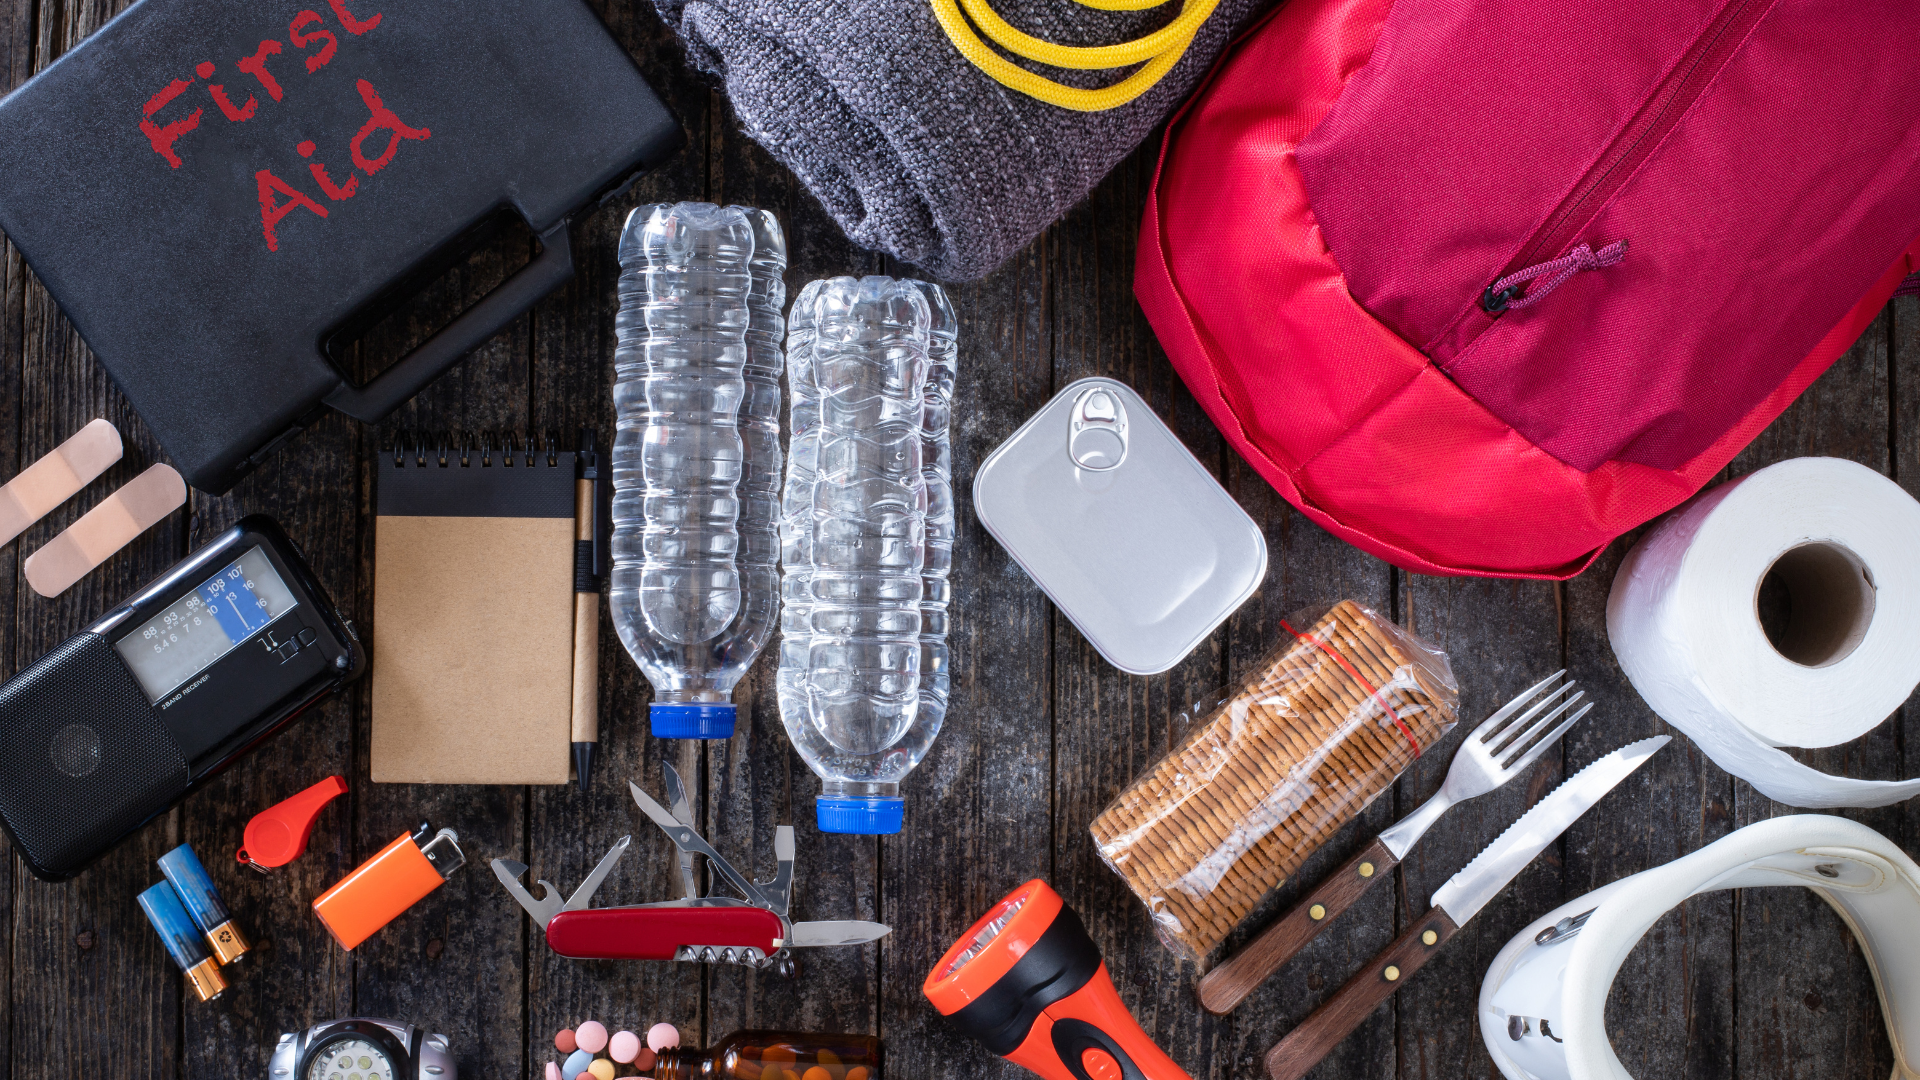 emergency supplies and bug out bag on the table